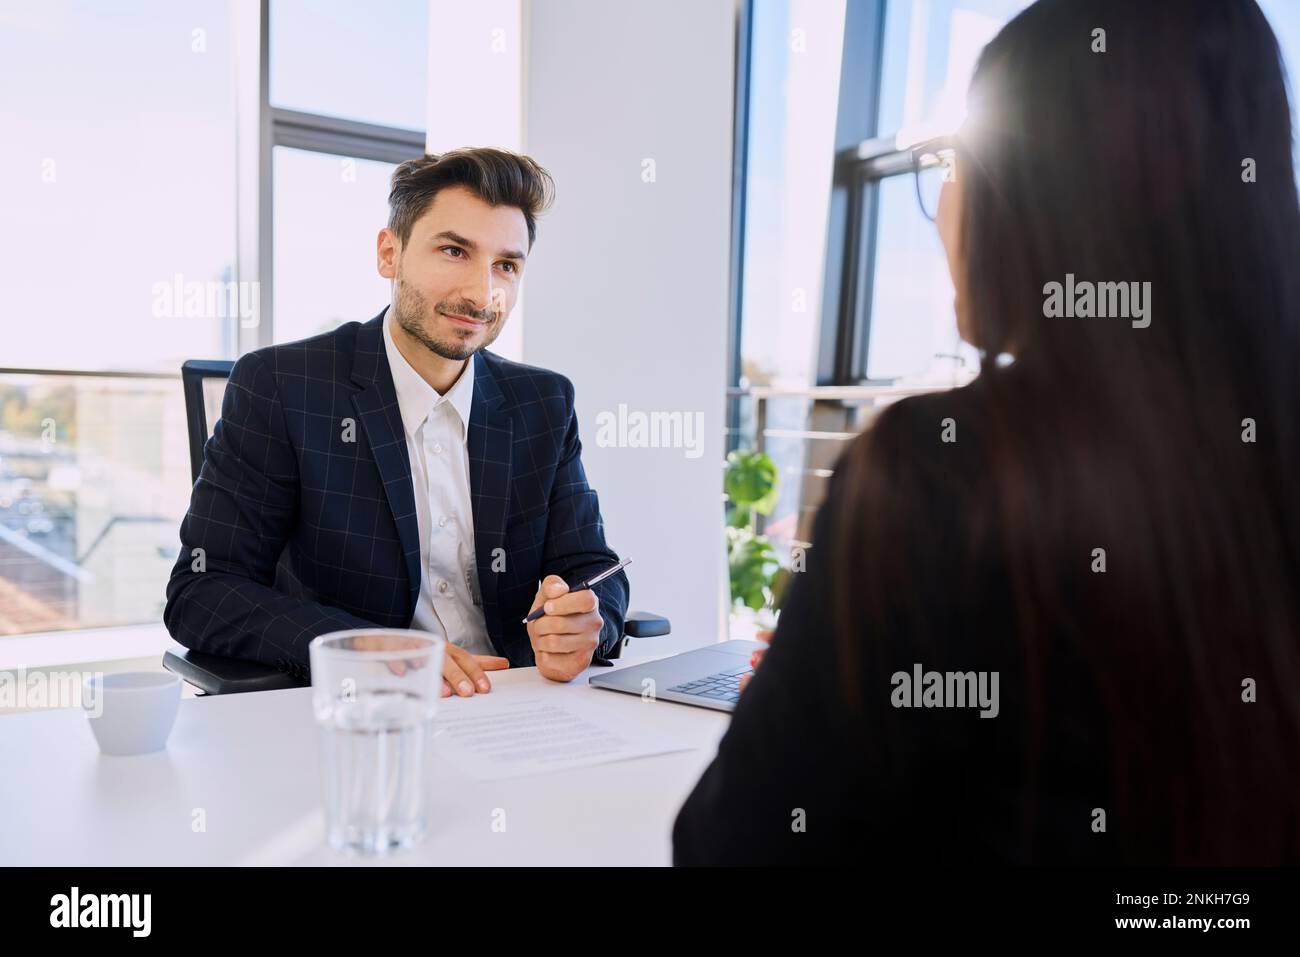 Recruiter with document talking to candidate in interview at office Stock Photo